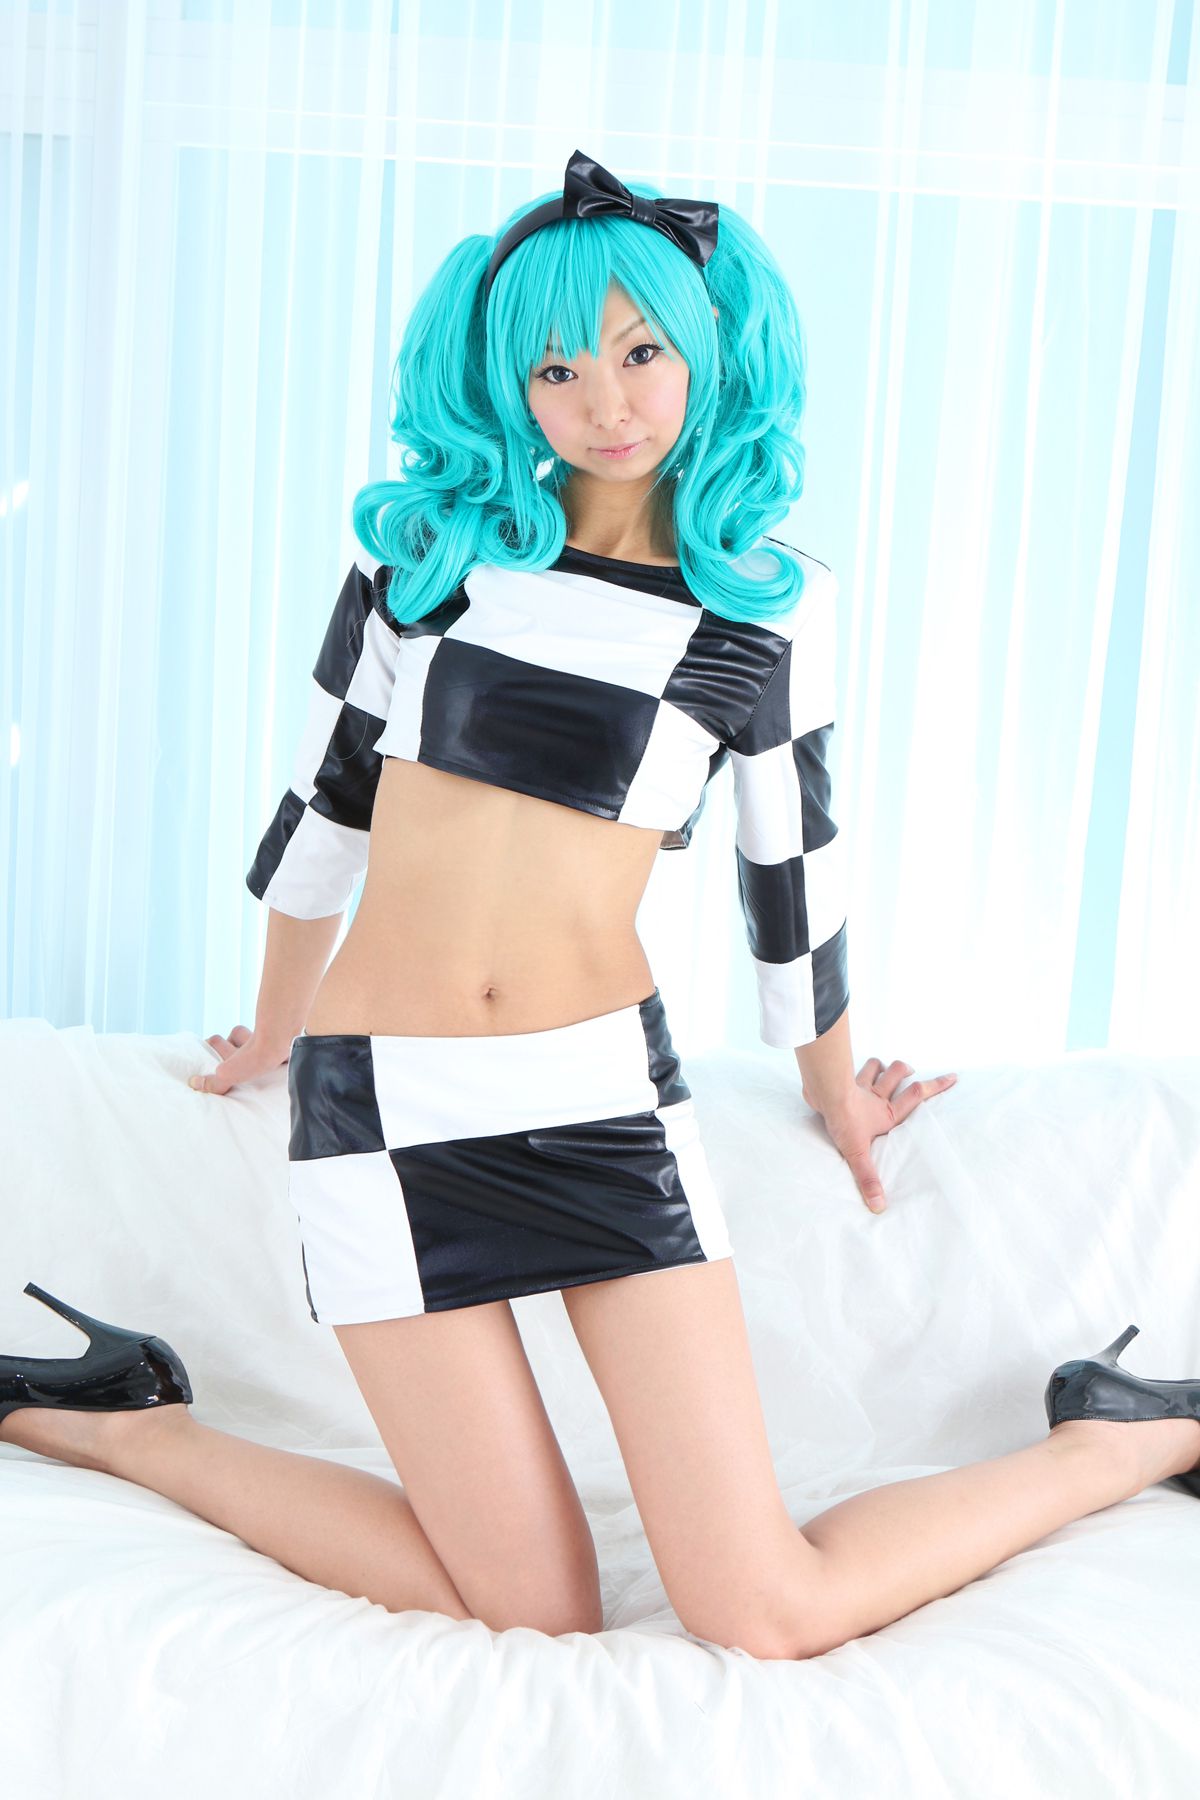 taotuhome[Cosplay套图] New Hatsune Miku from Vocaloid - So Sexy第44张